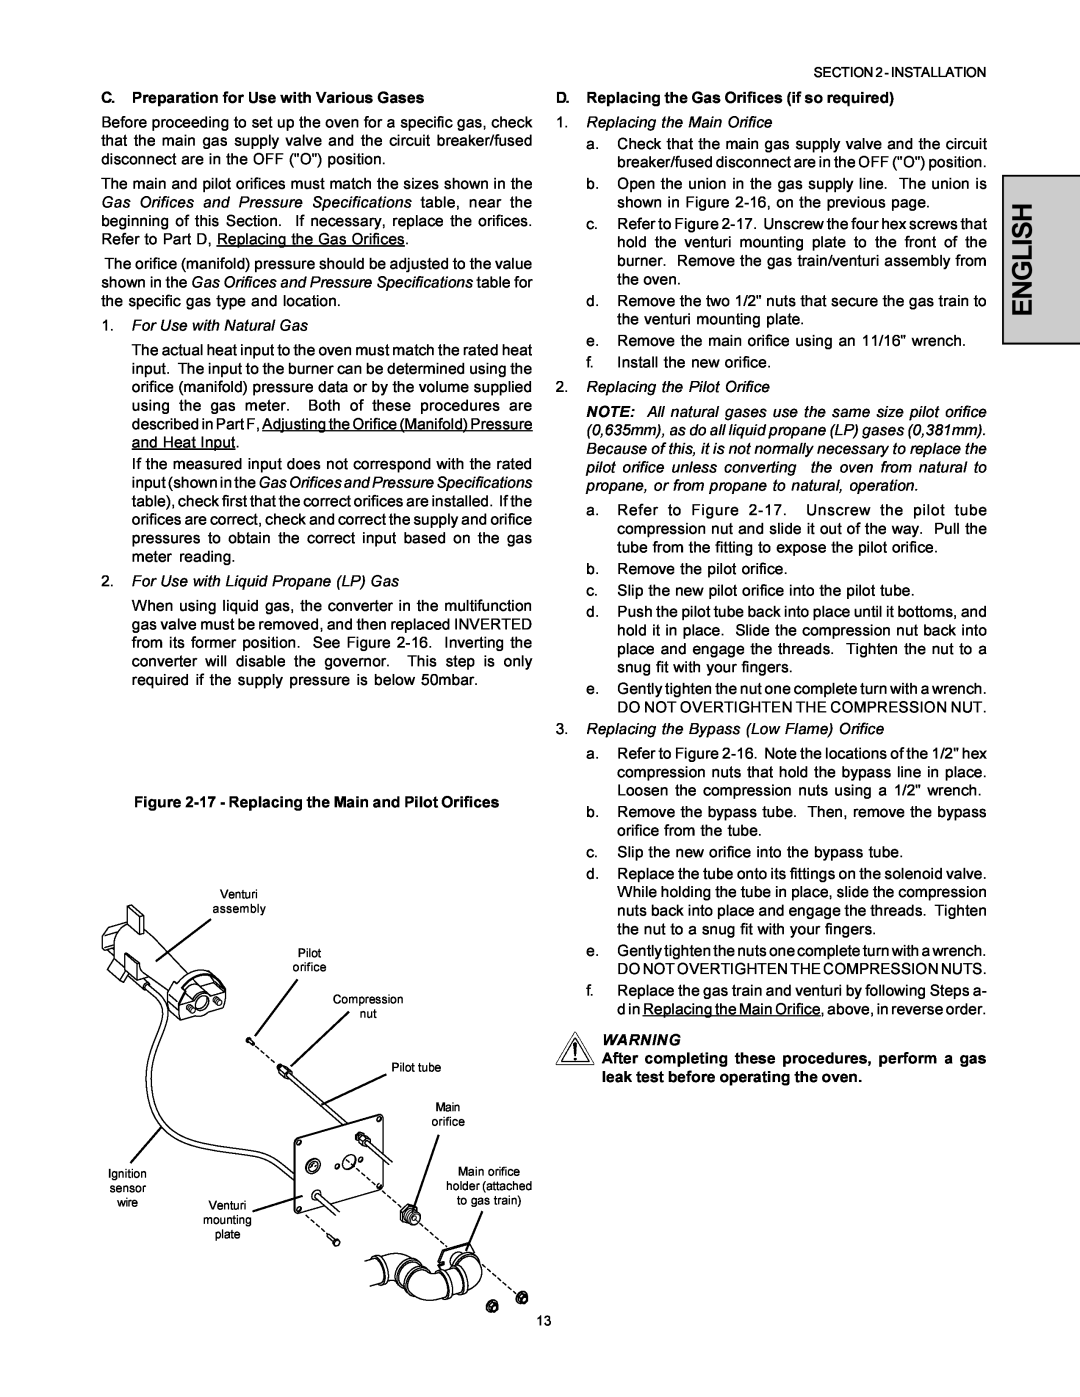 Middleby Marshall PS360-U installation manual English, C.Preparation for Use with Various Gases, For Use with Natural Gas 